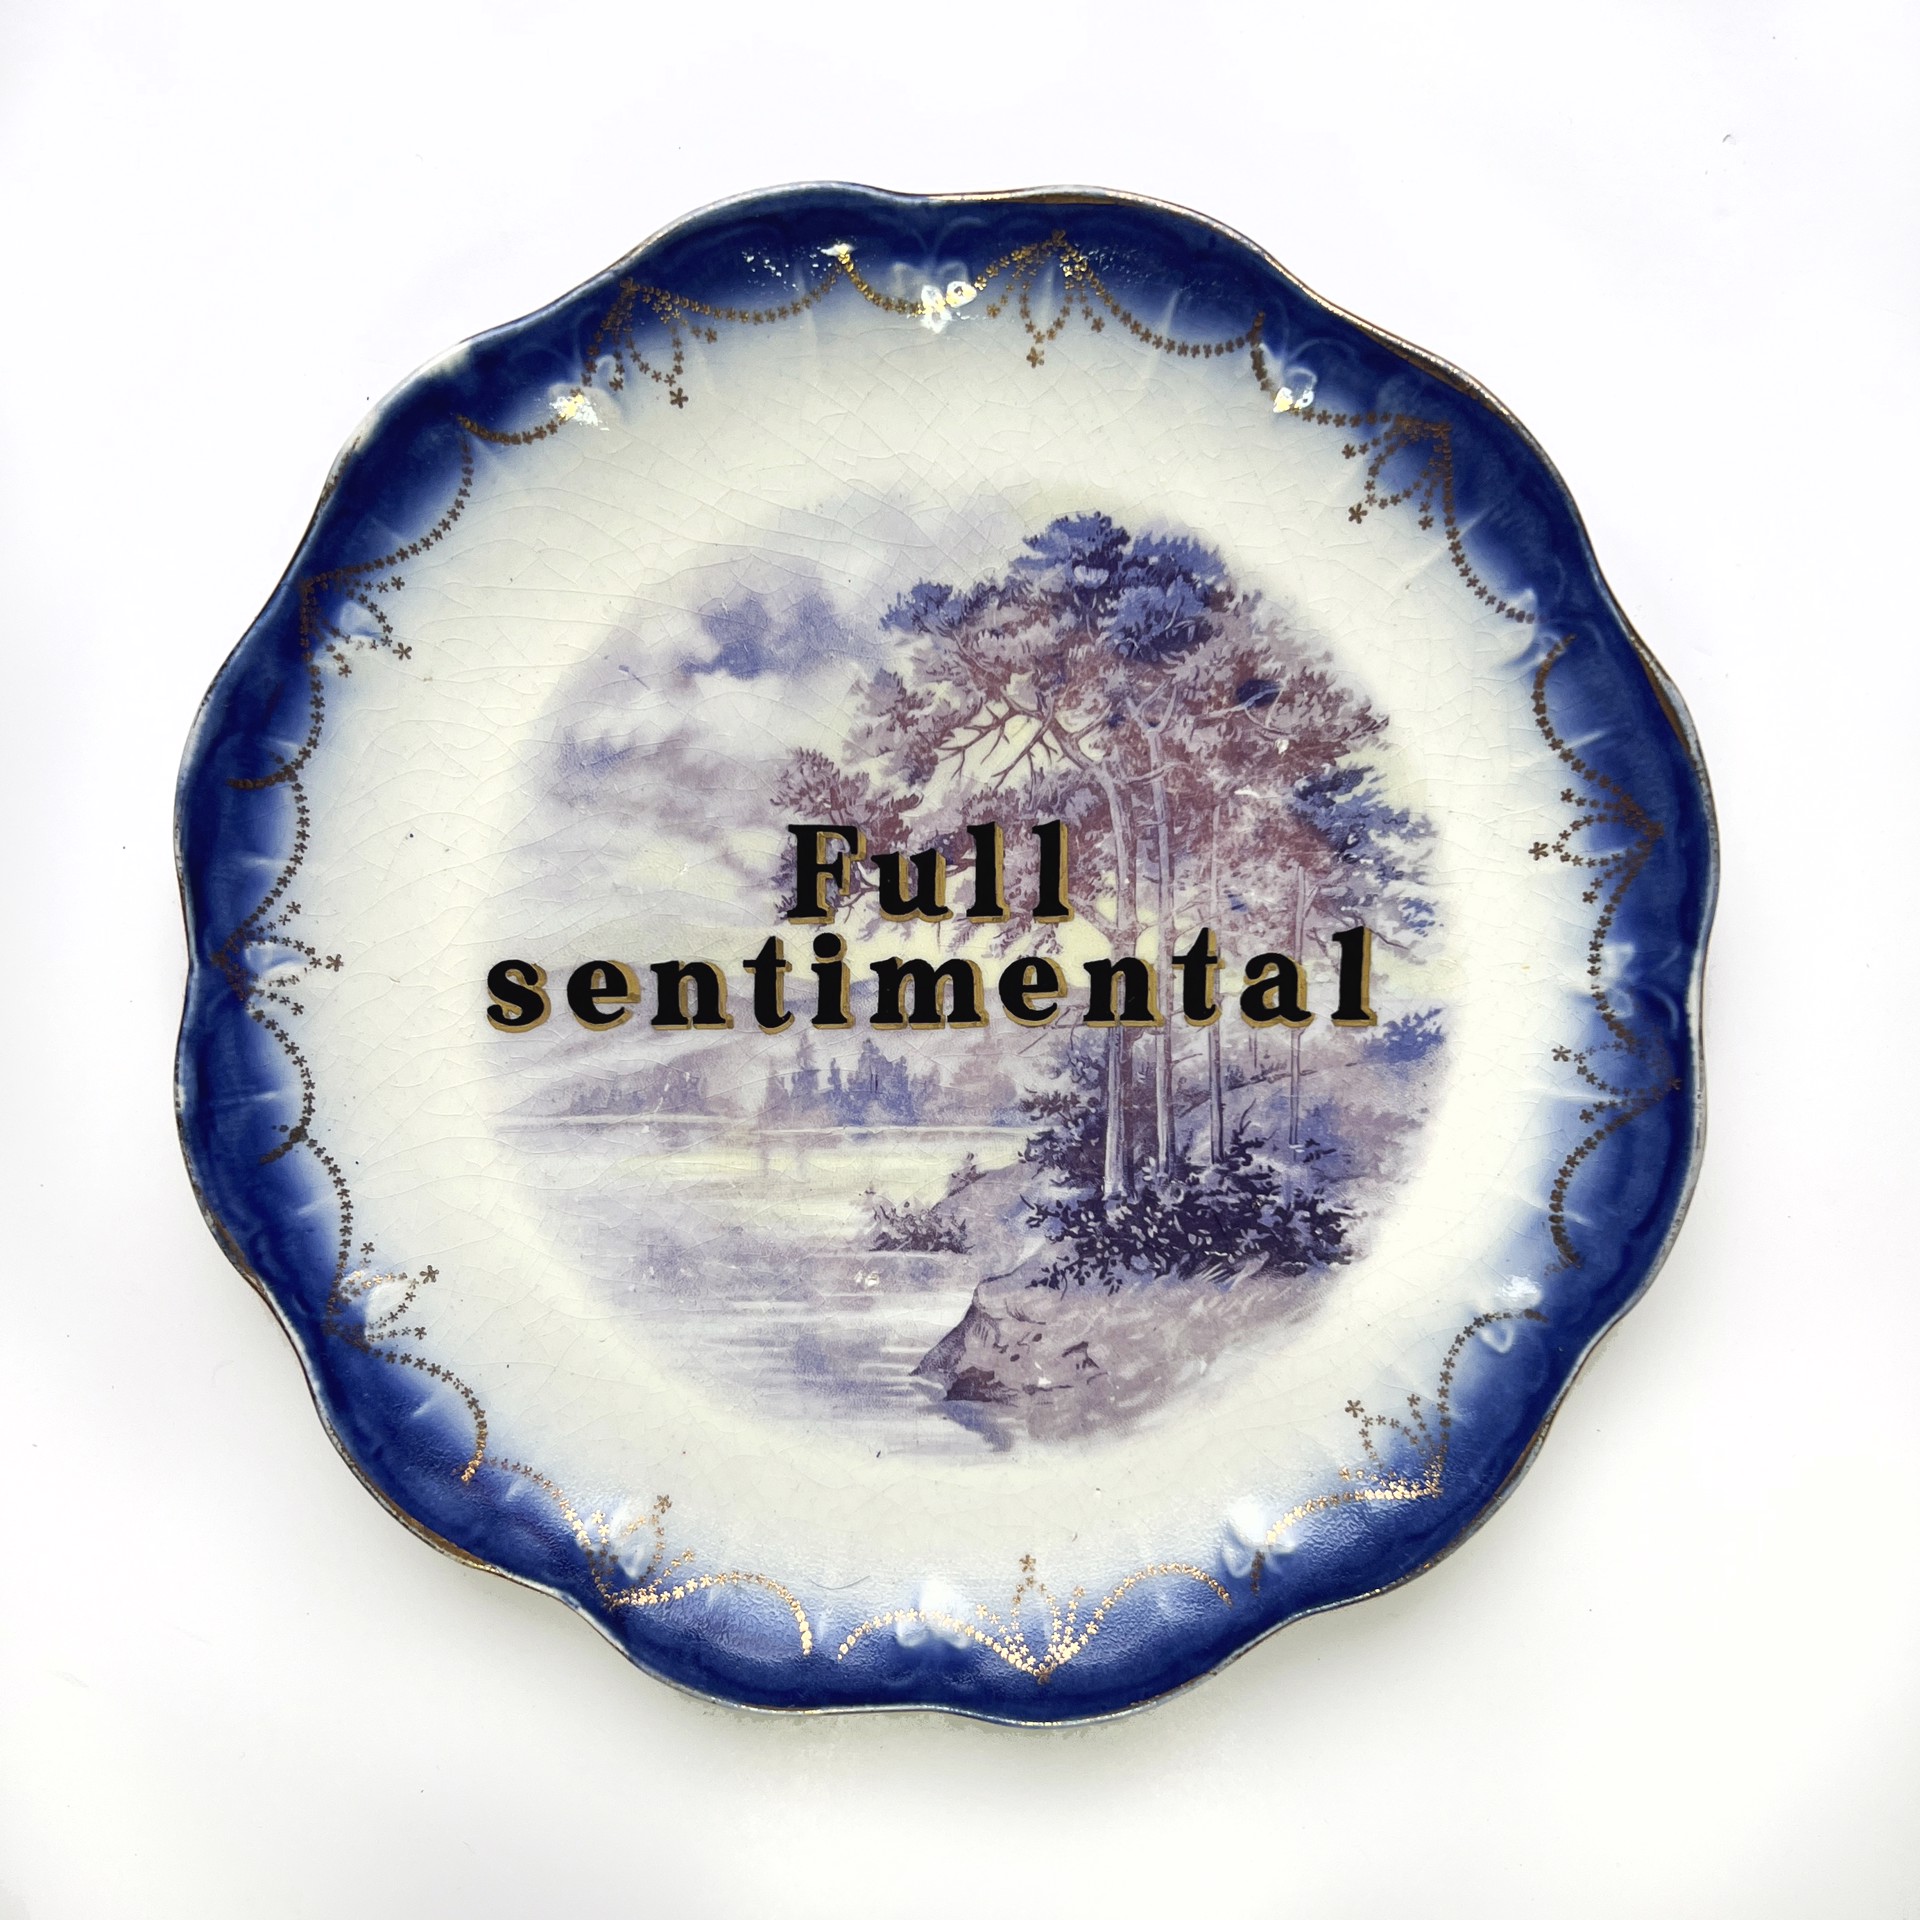 Full sentimental by Marie-Claude Marquis